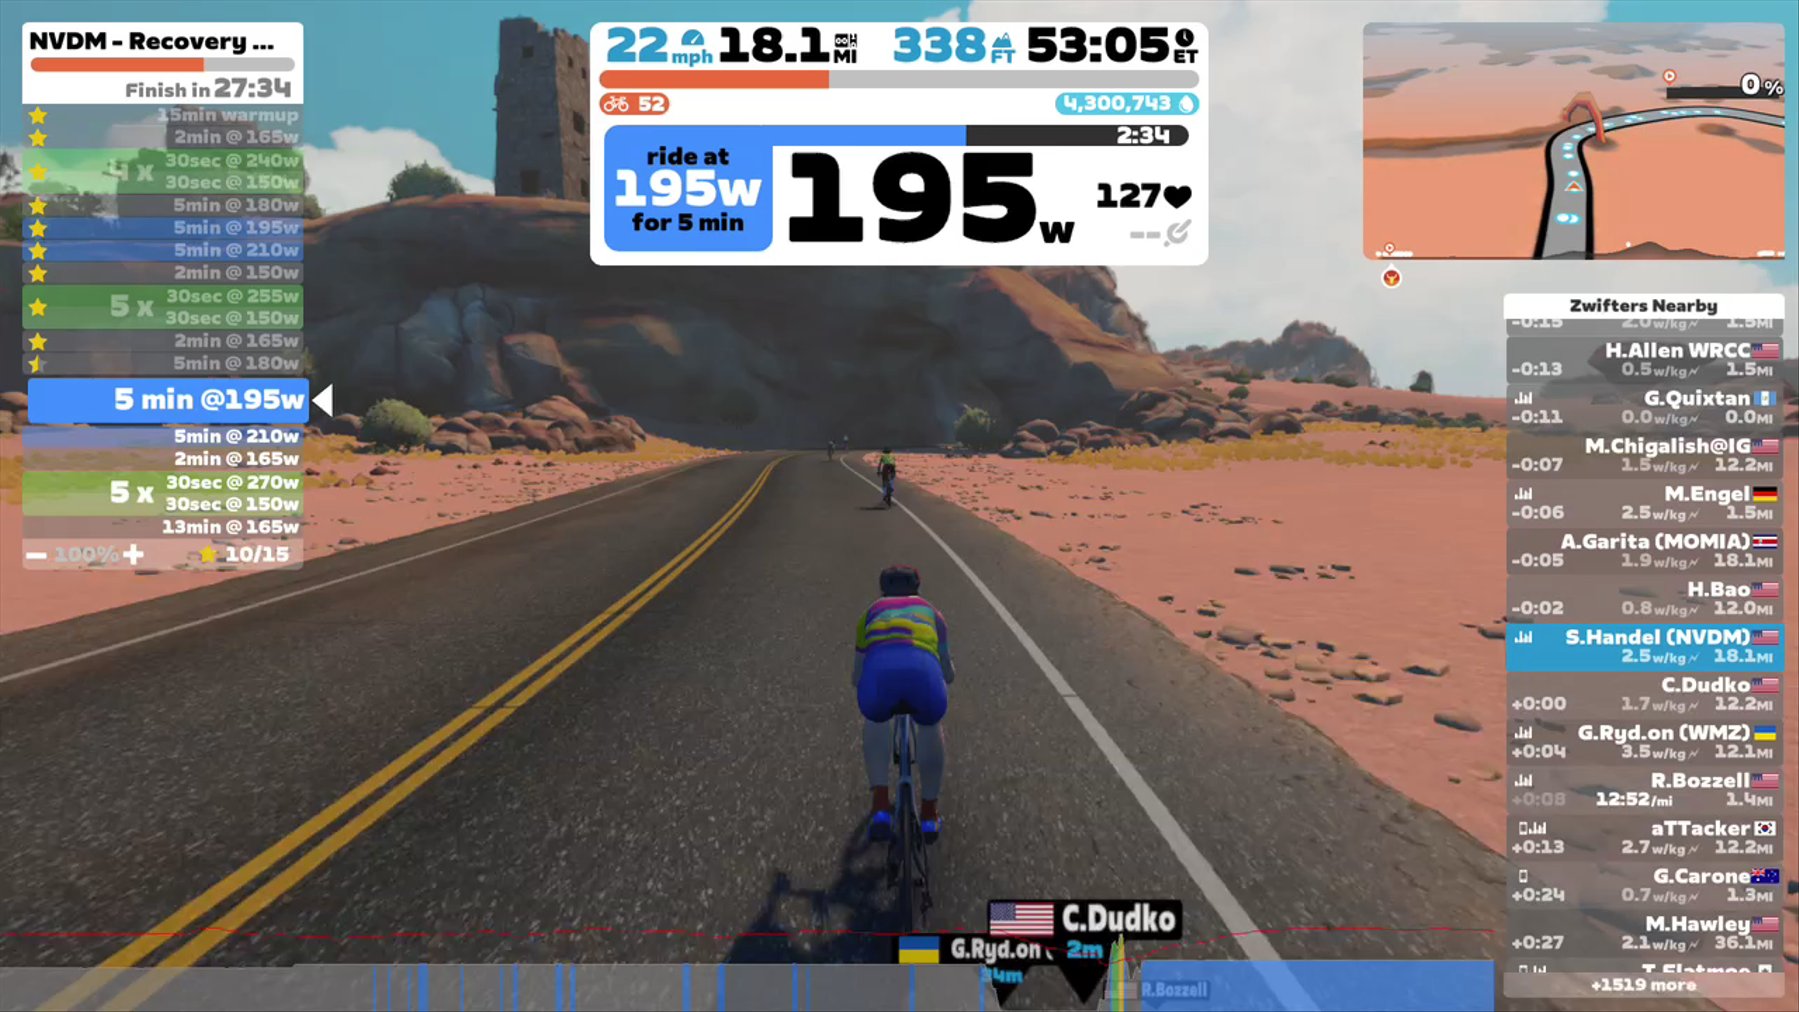 Zwift - NVDM - Recovery Spin - Z2 and High cadence in Watopia